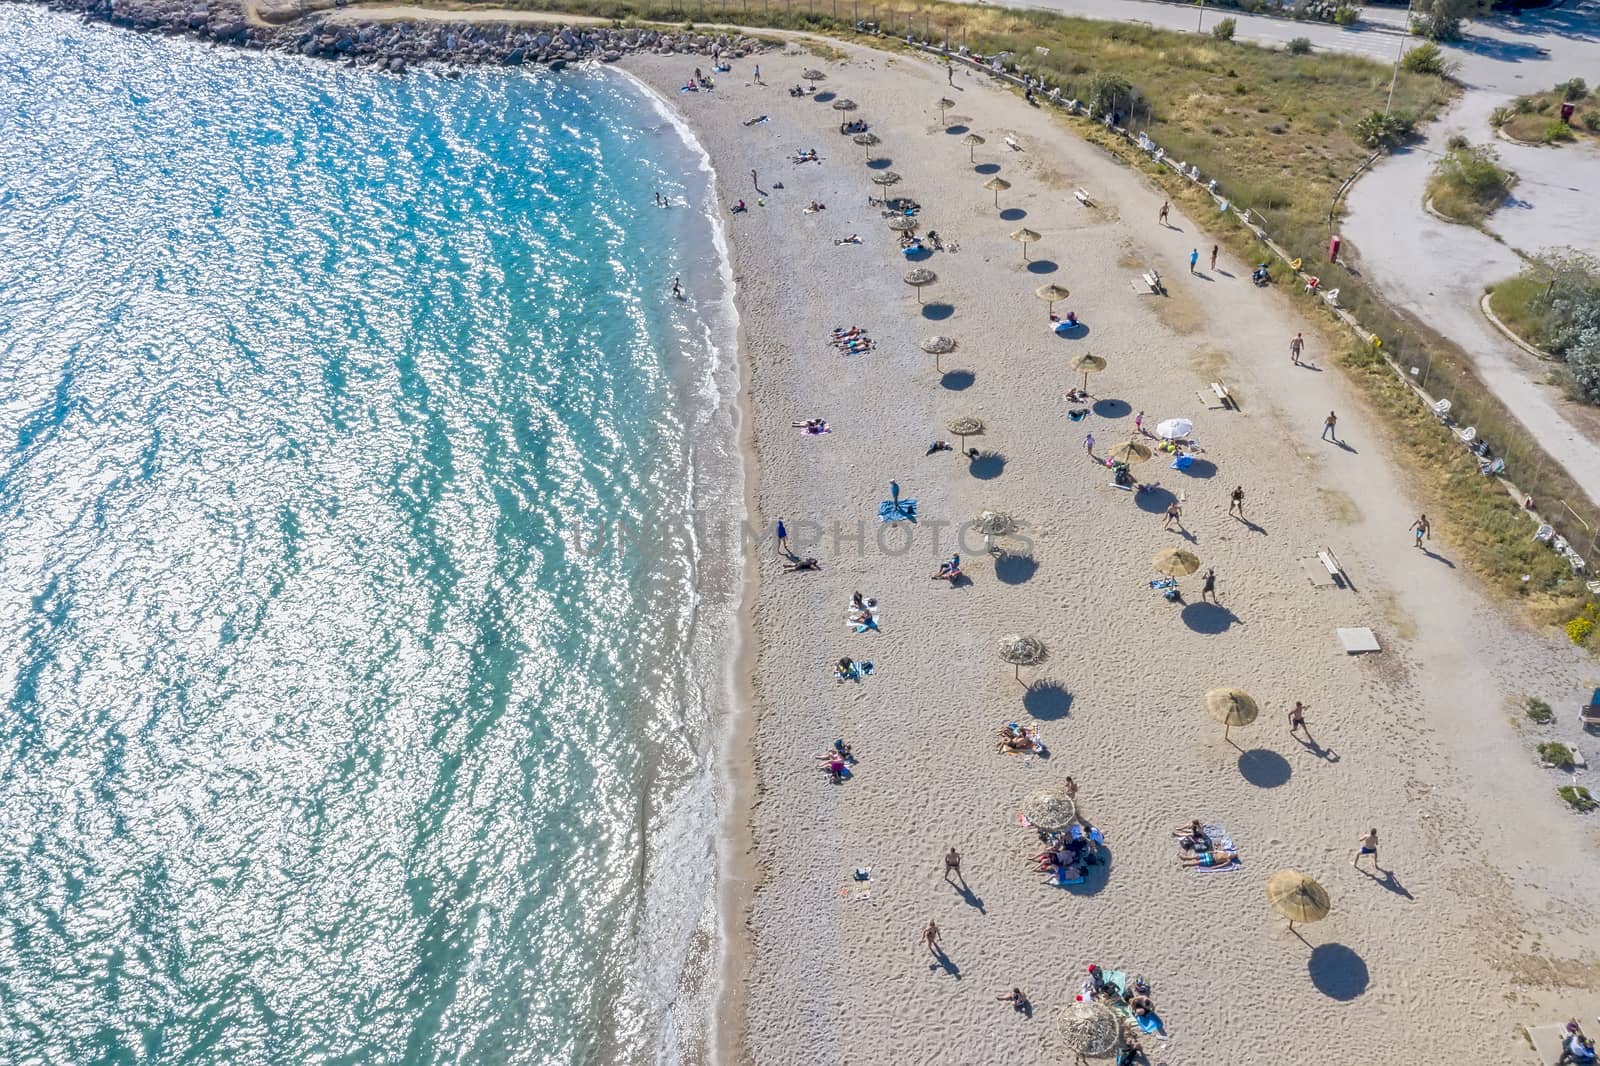 The new beach of Glyfada, adapted to the time of coronavirus implementing strict sanitary rules and safe distance keeping to avoid congestion